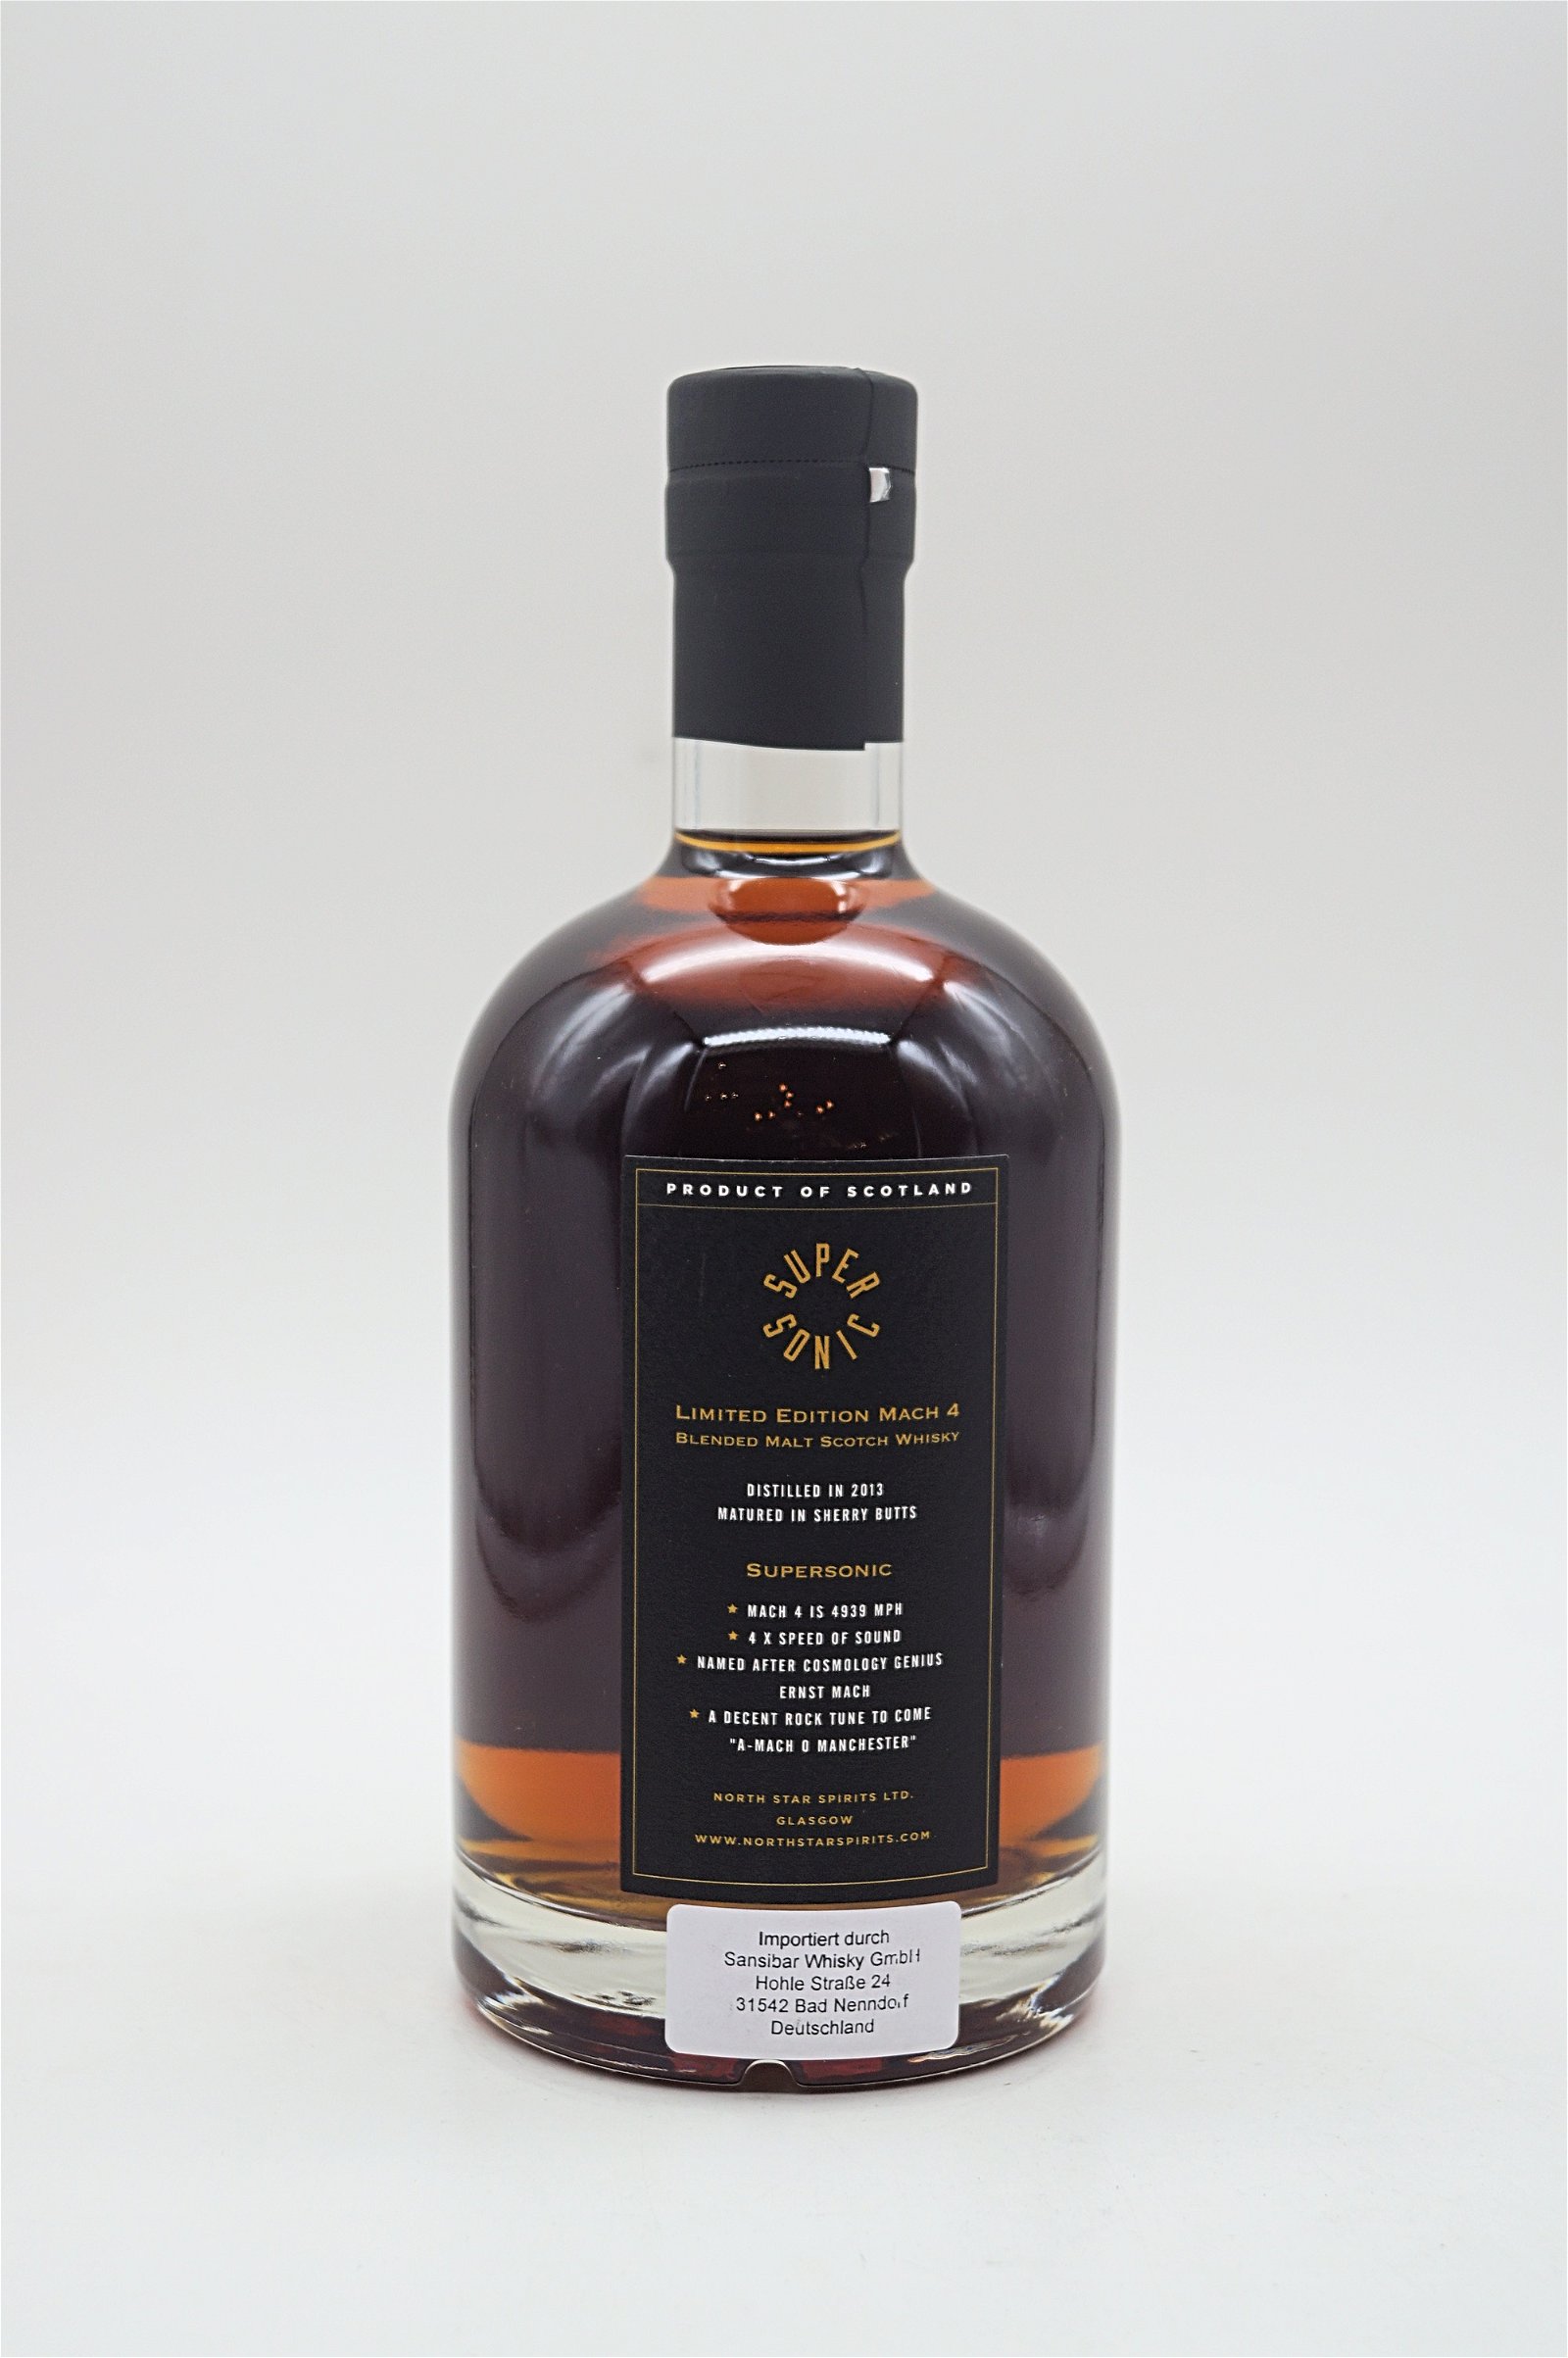 North Star Supersonic Limited Edition Mach 4 Blended Malt Scotch Whisky